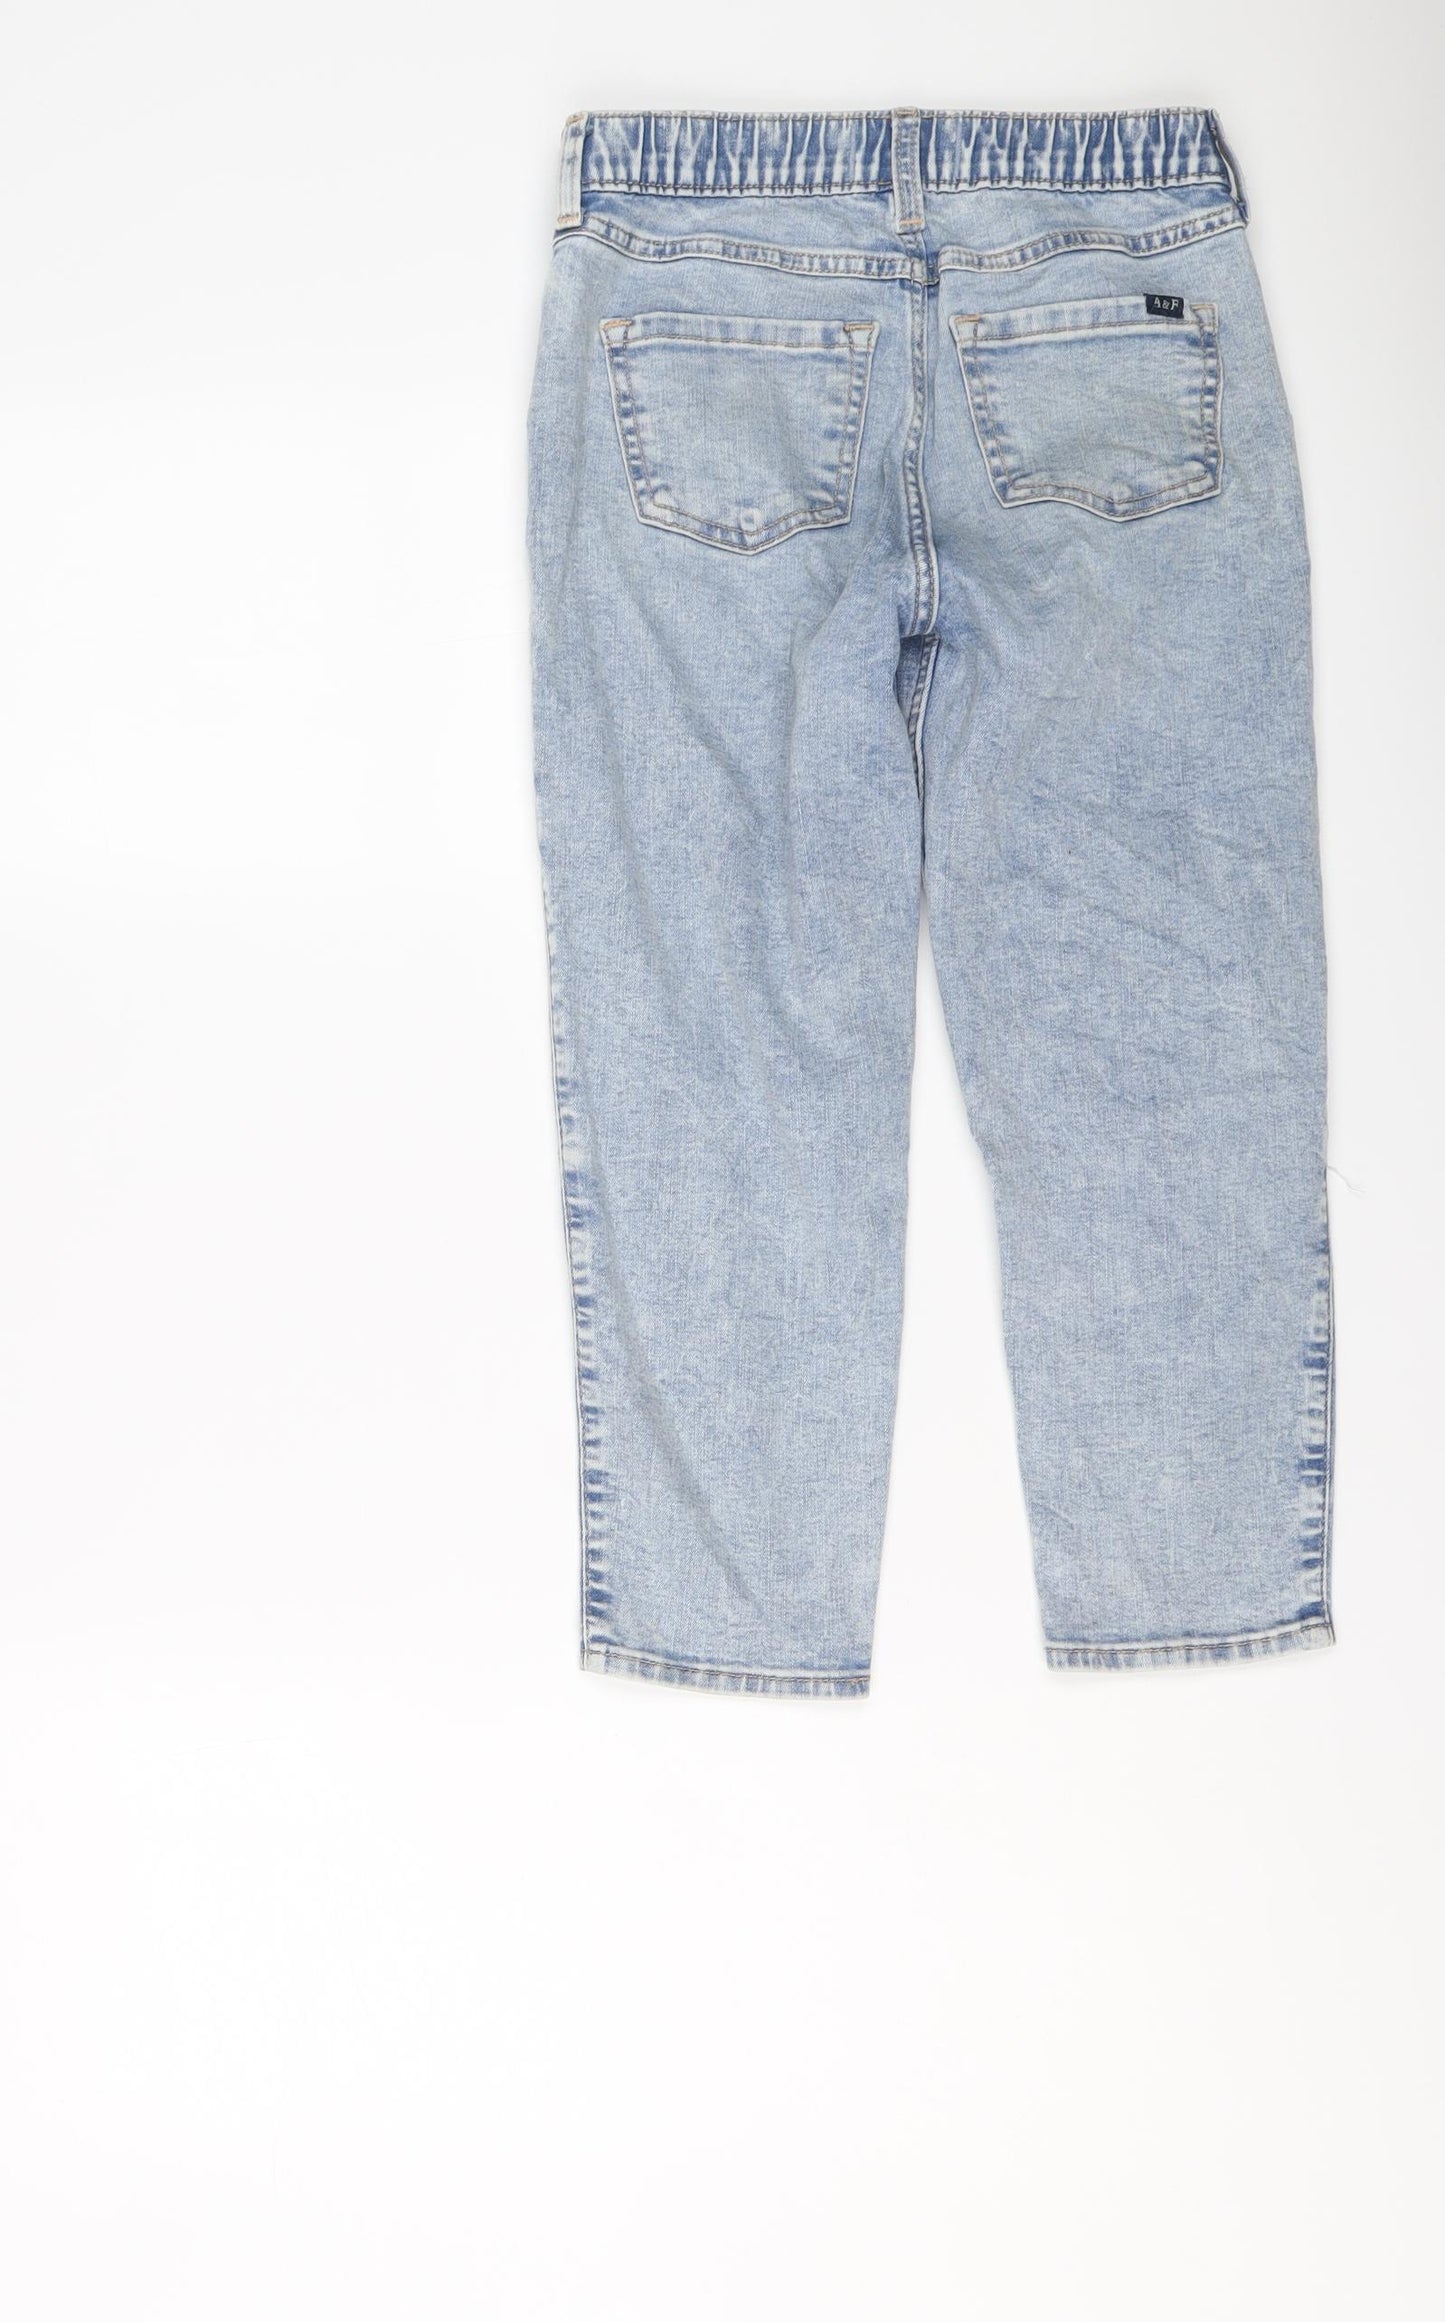 abercrombie kids Girls Blue Cotton Straight Jeans Size 9-10 Years Regular Pullover - Distressed